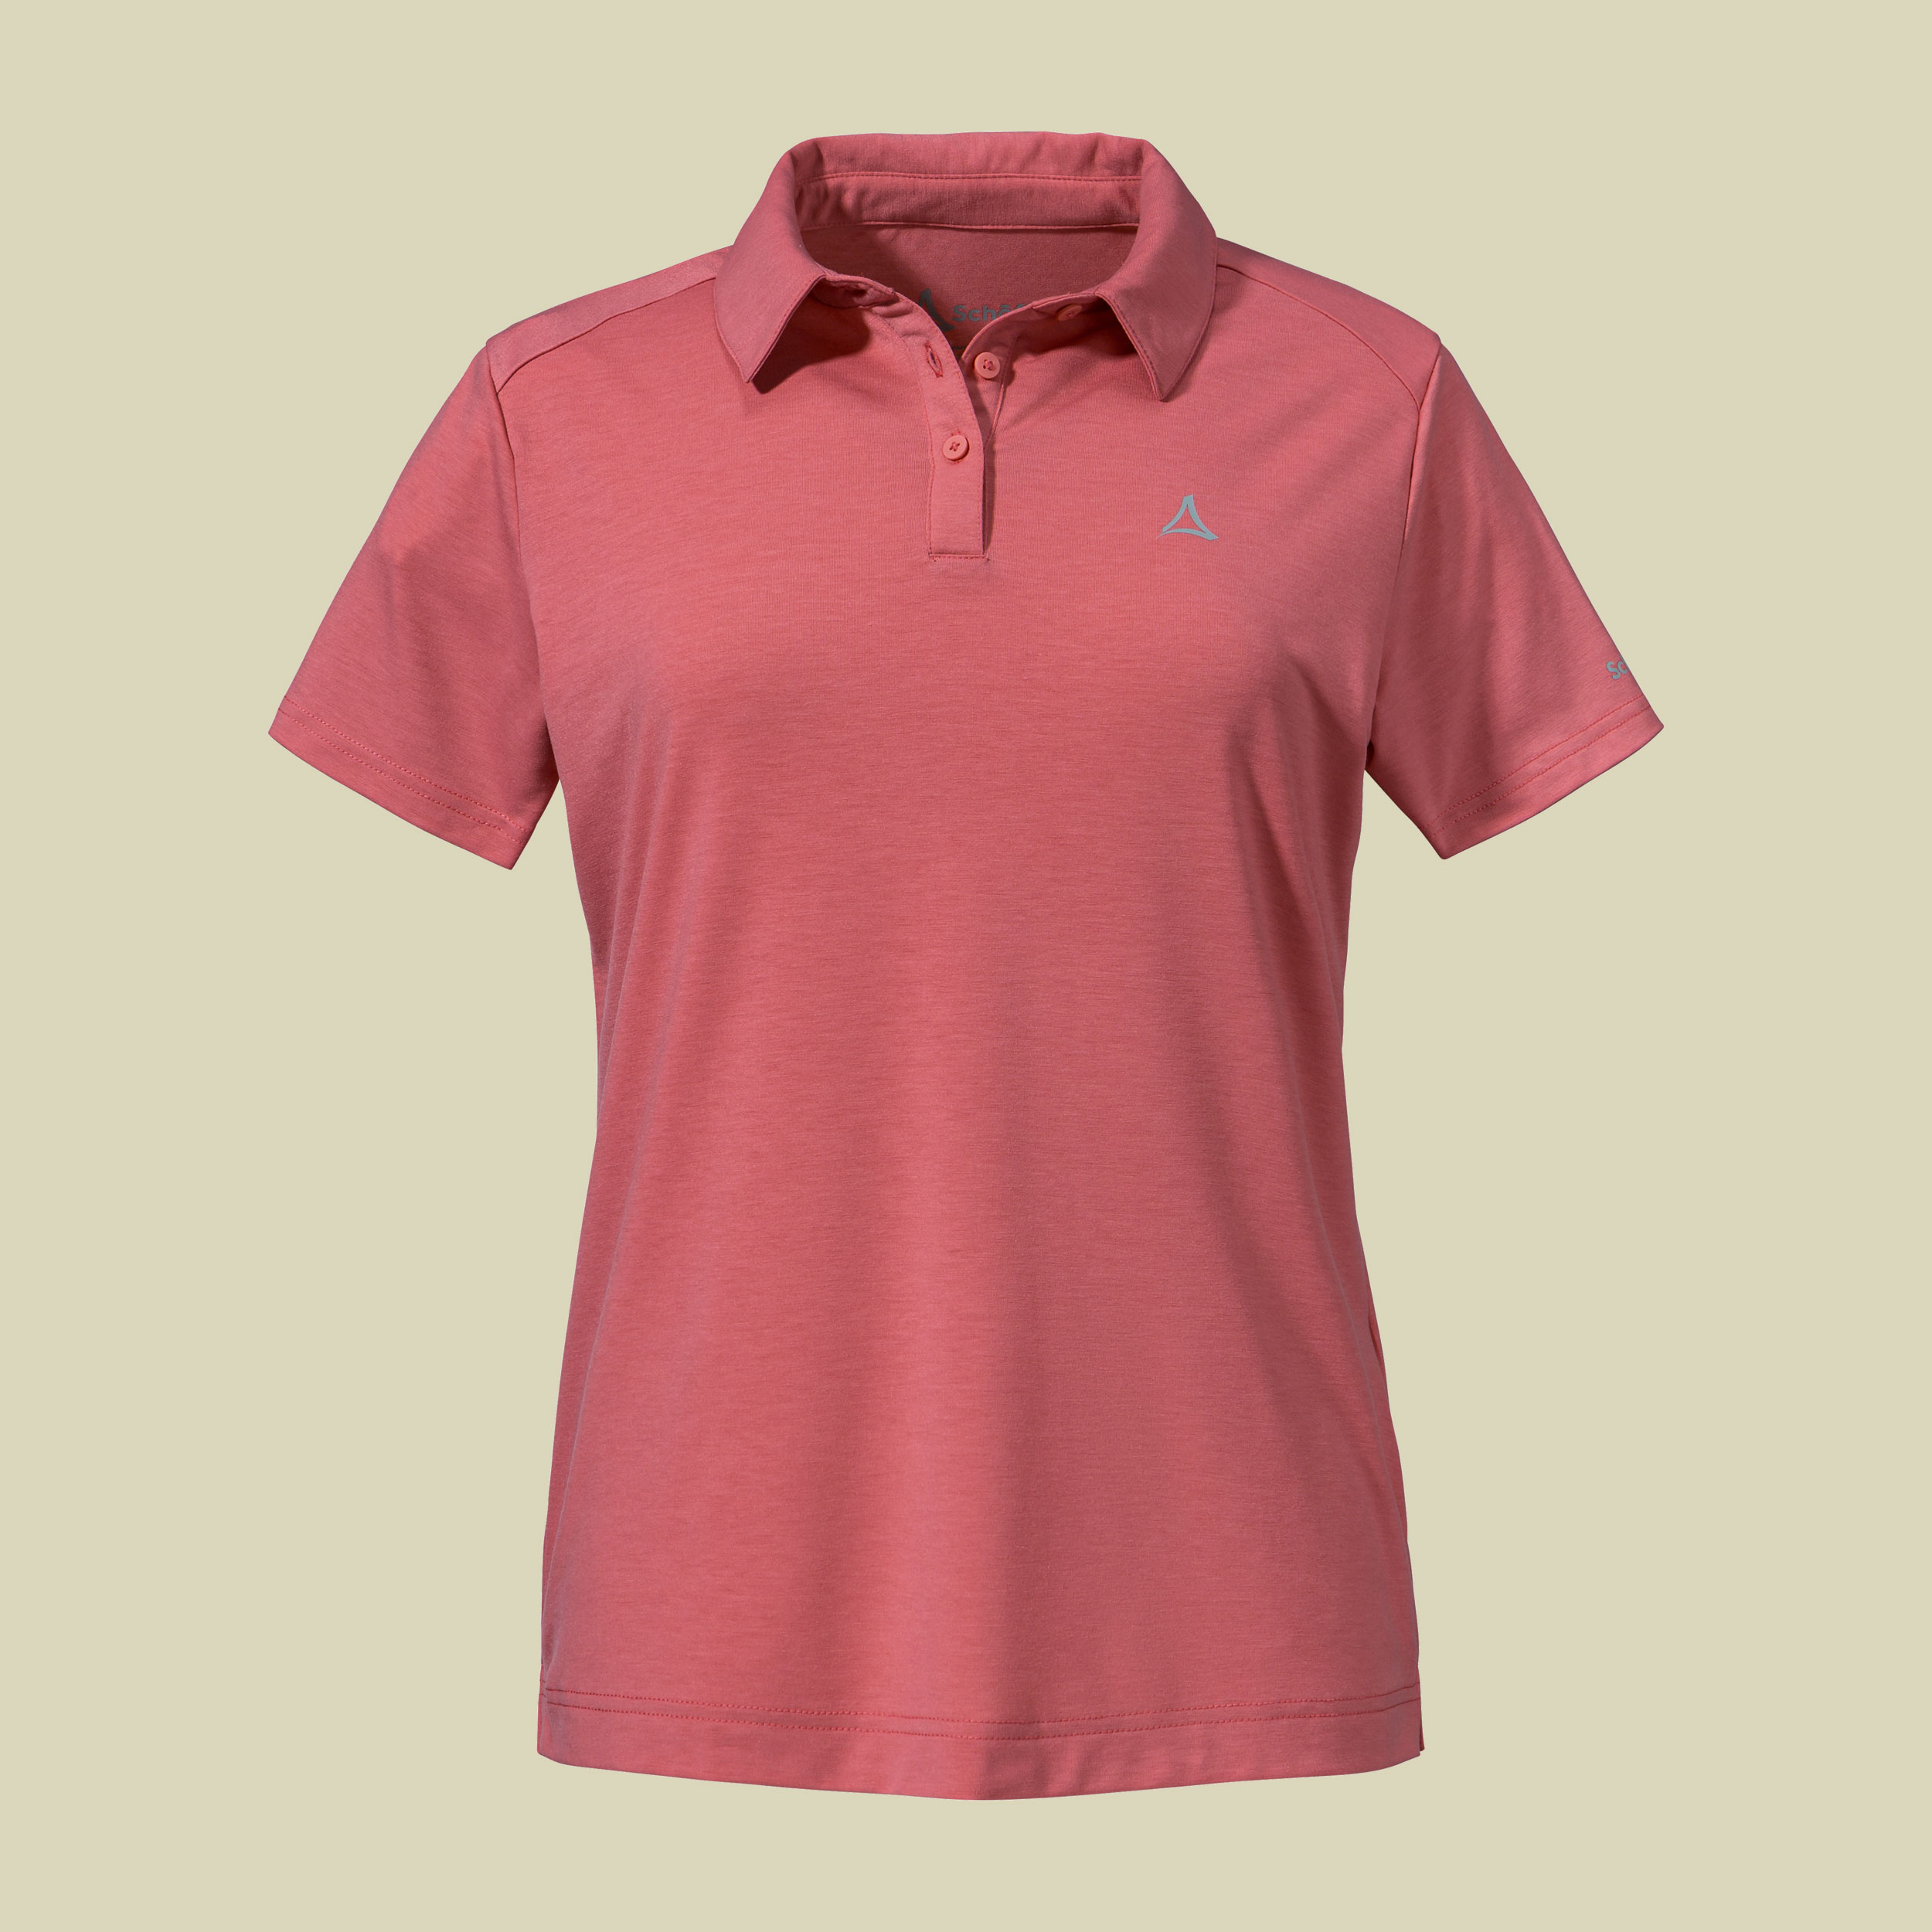 Polo Shirt Ramseck L Women 40 rot - clasping rose